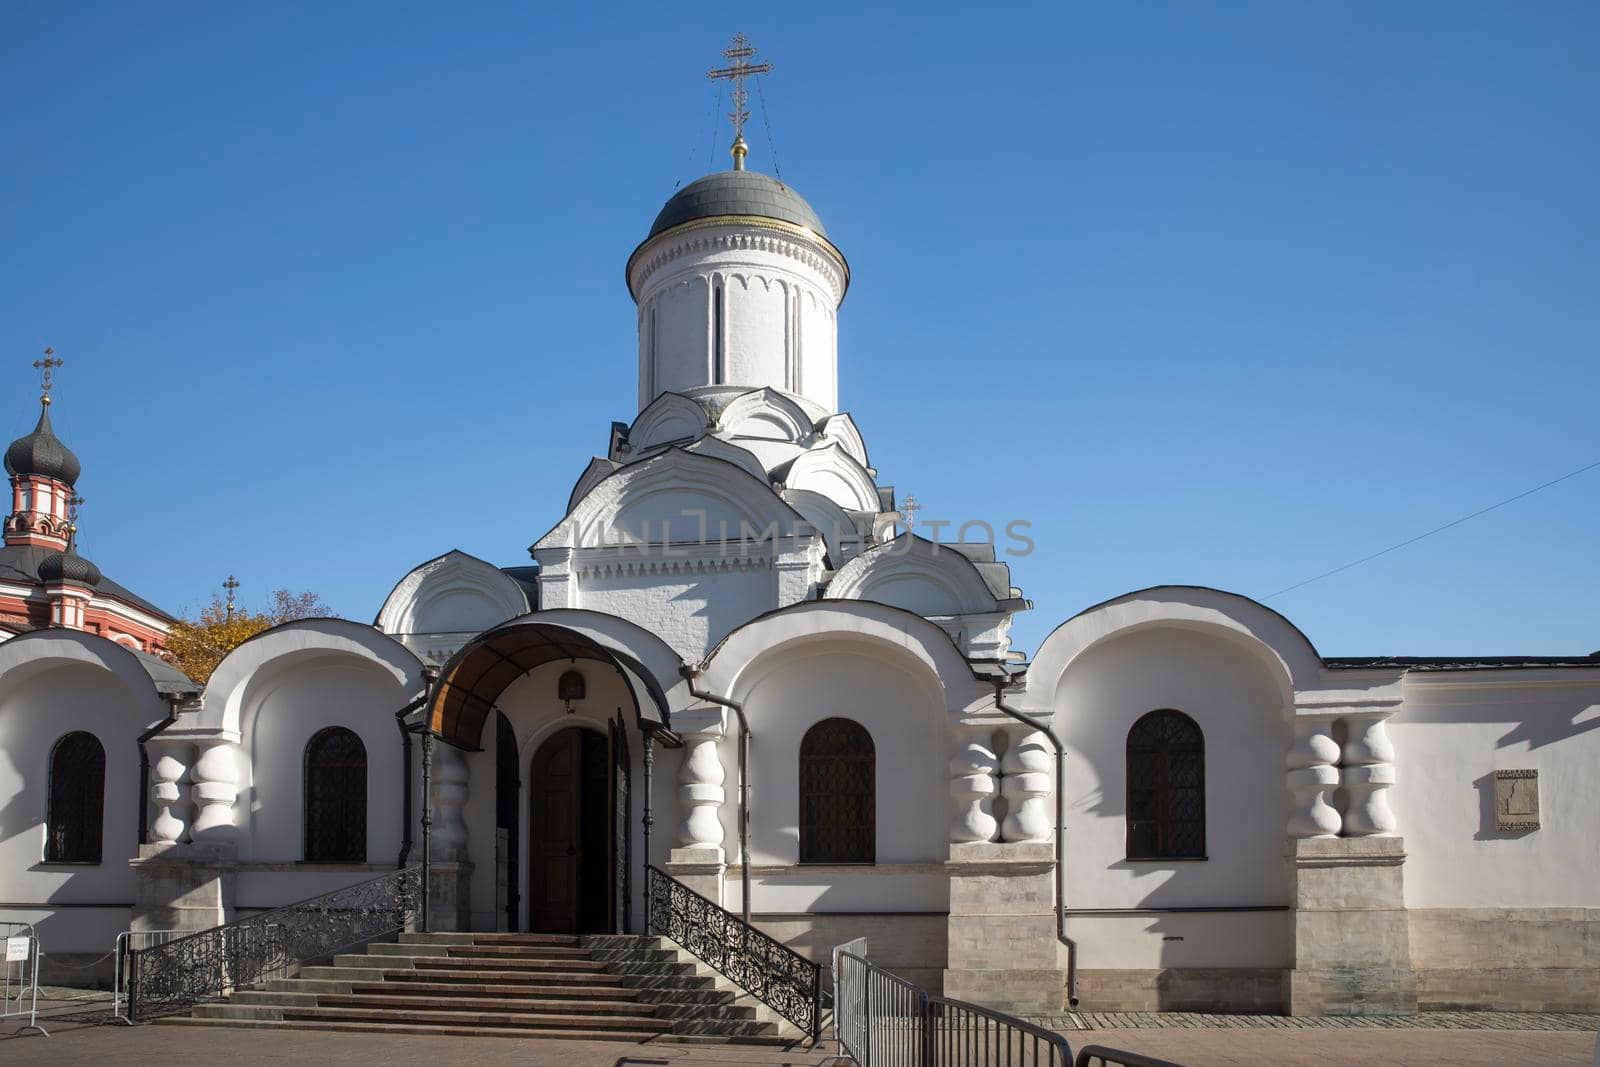 Katholikon of Nativity of God's Mother. Rozhdestvensky Convent, or Convent of Nativity of Theotokos is one of oldest nunneries in Moscow, located inside Boulevard Ring by elenarostunova